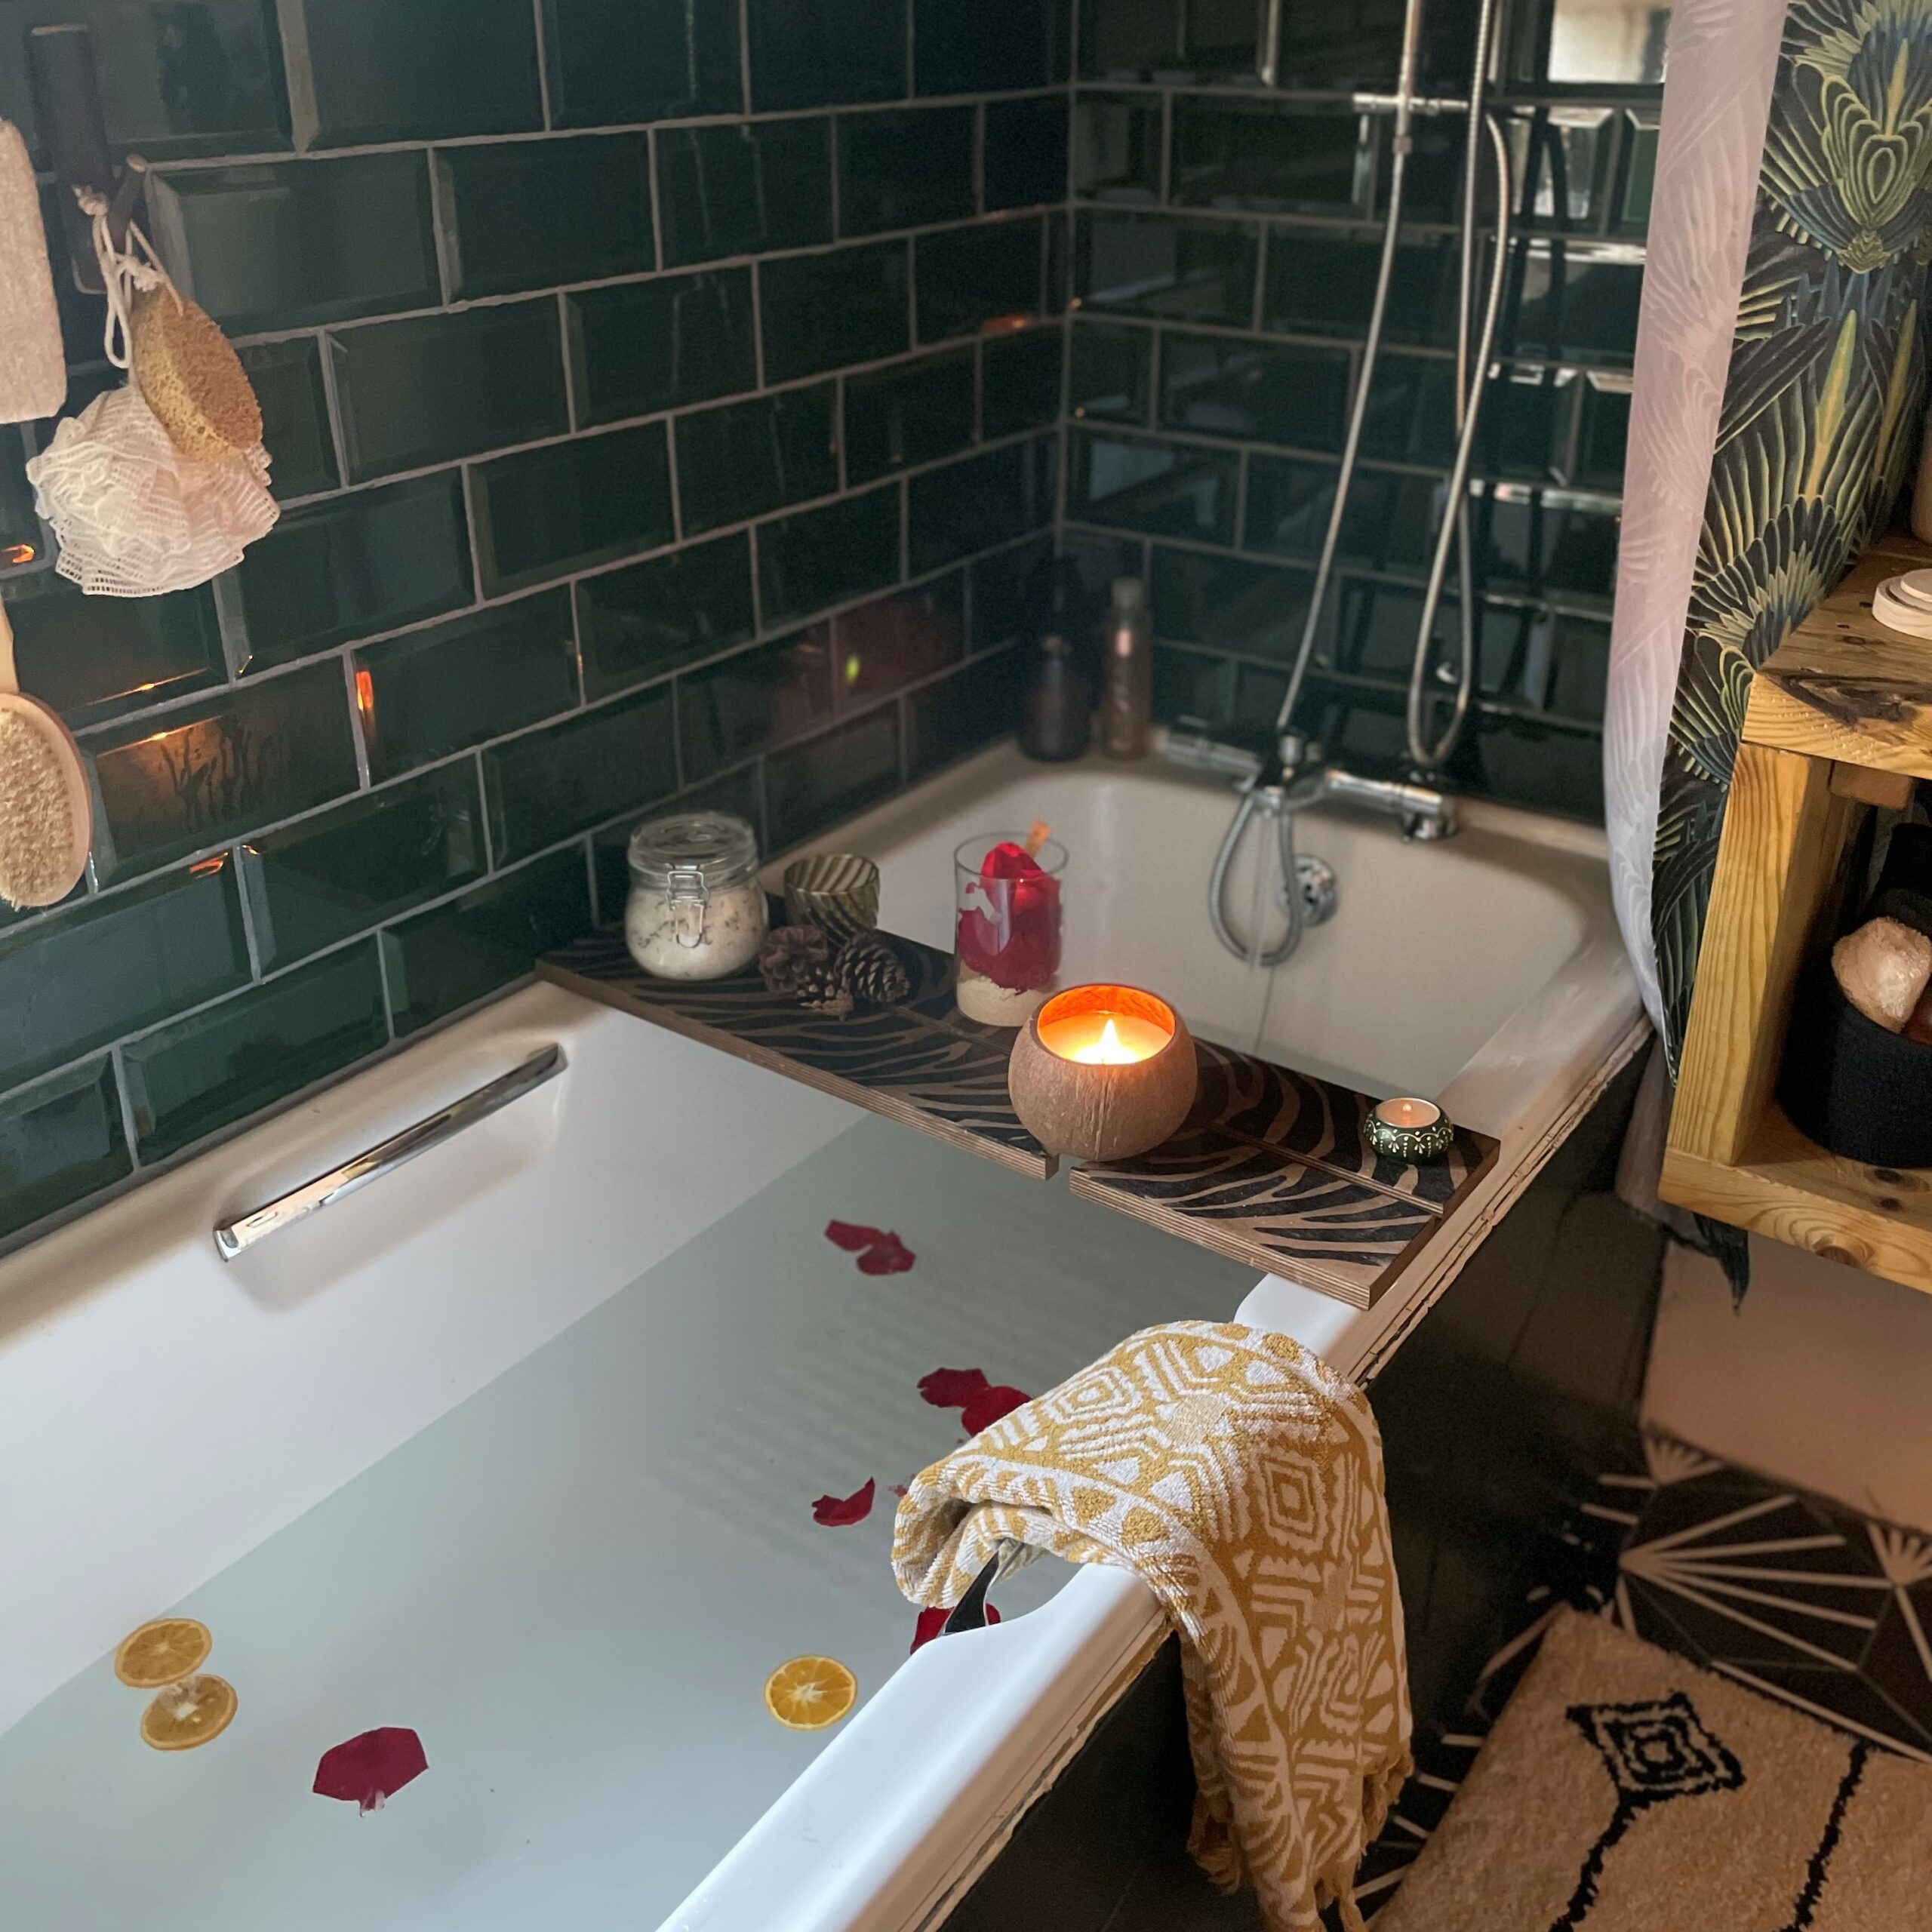 Pixie Created Her Eclectic Bathroom with Our Victorian Green Metro Tiles